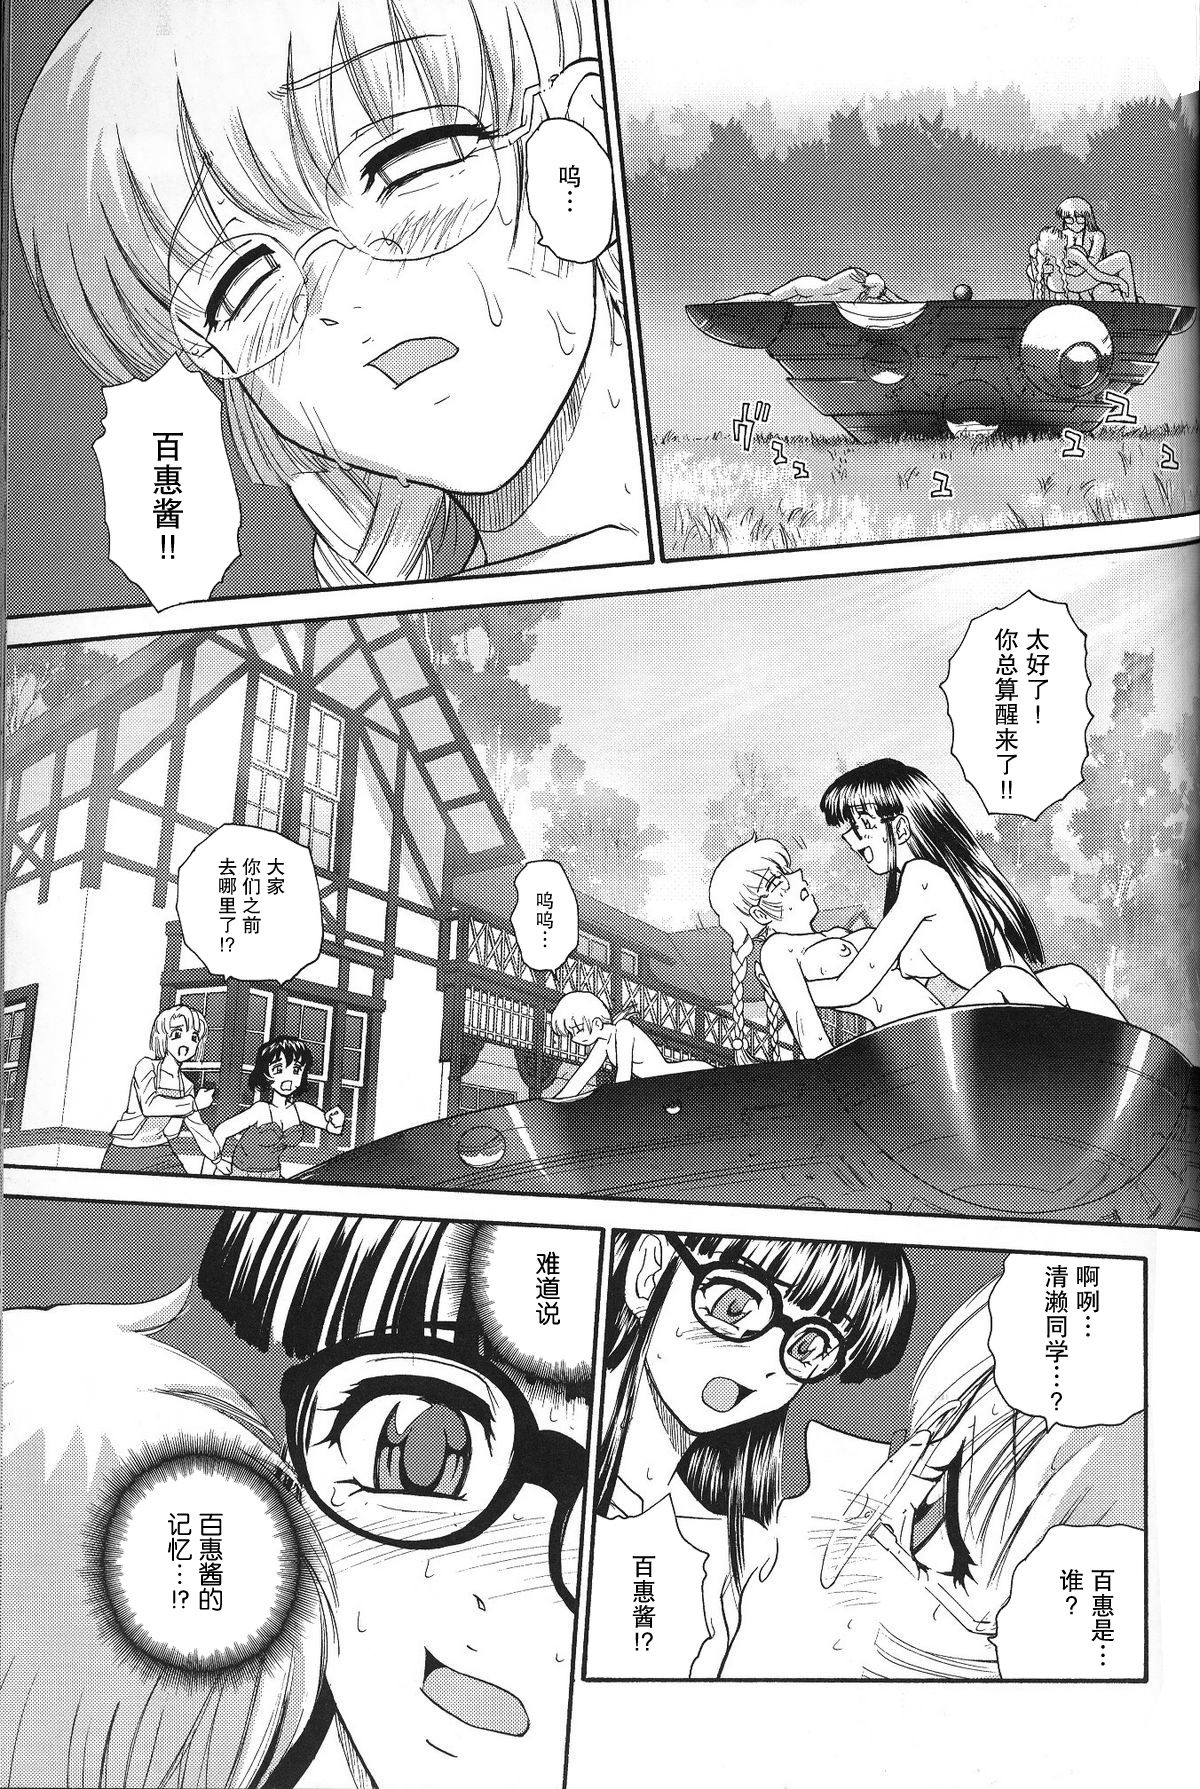 (C71) [Behind Moon (Q)] Dulce Report 8 | 达西报告 8 [Chinese] [哈尼喵汉化组] [Decensored] page 18 full